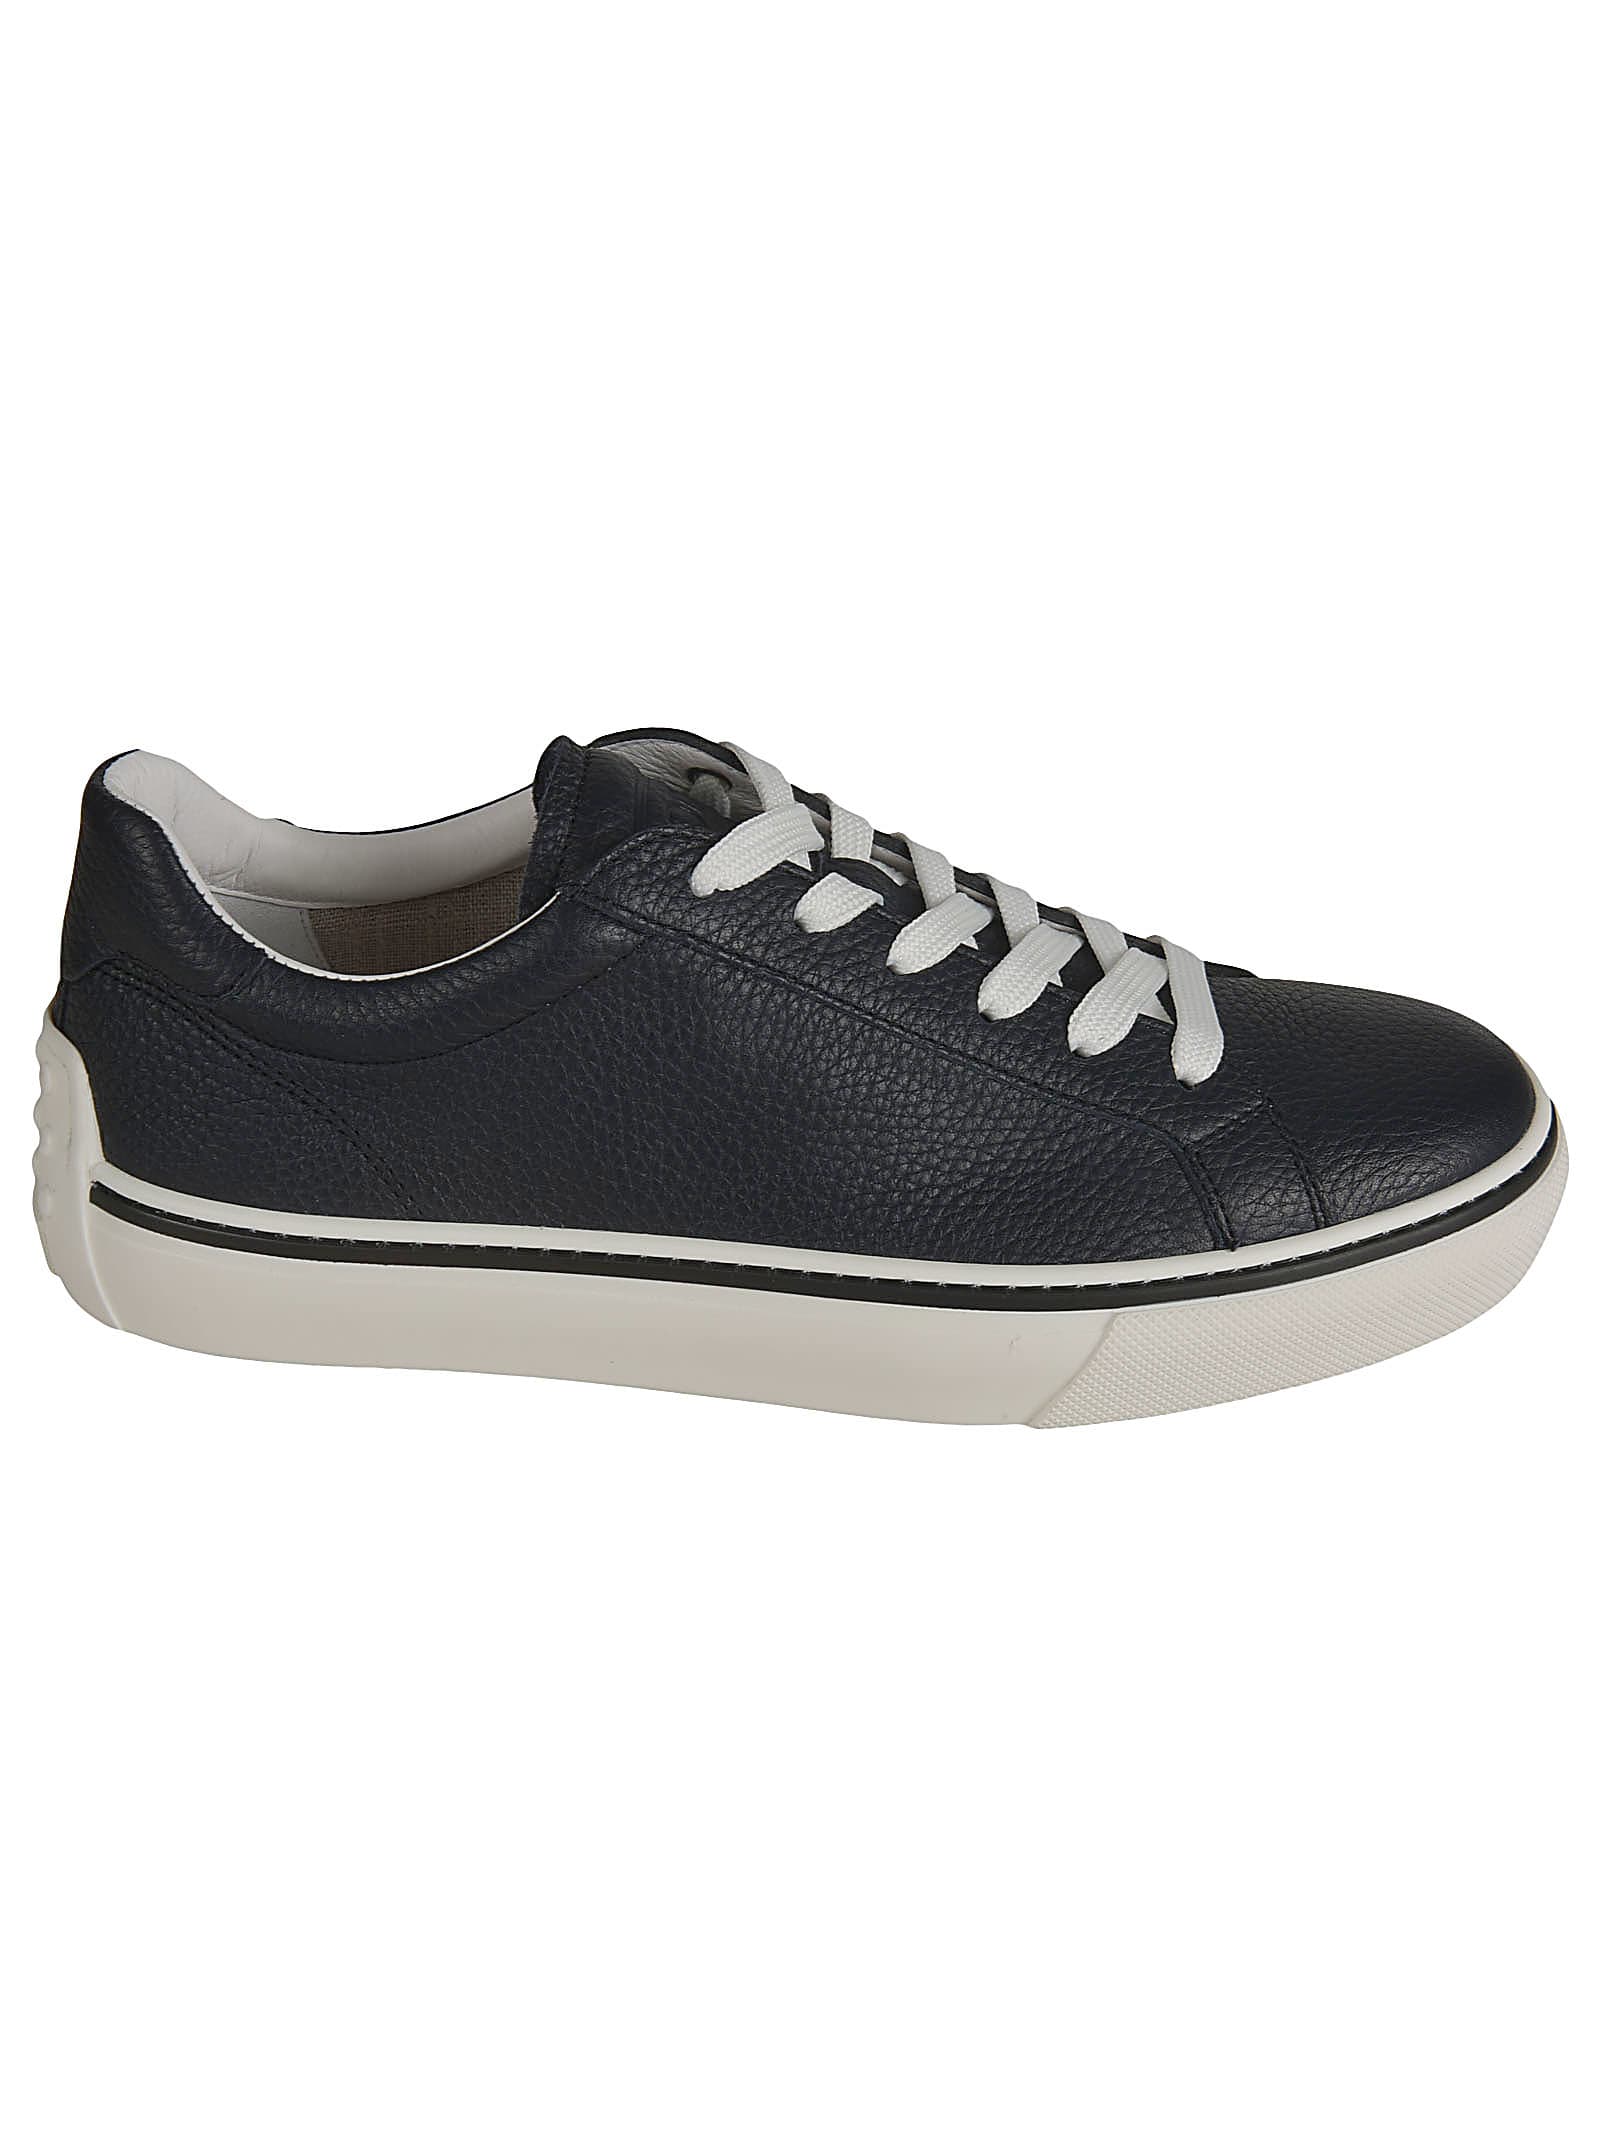 Tods Grained Leather Classic Sneakers